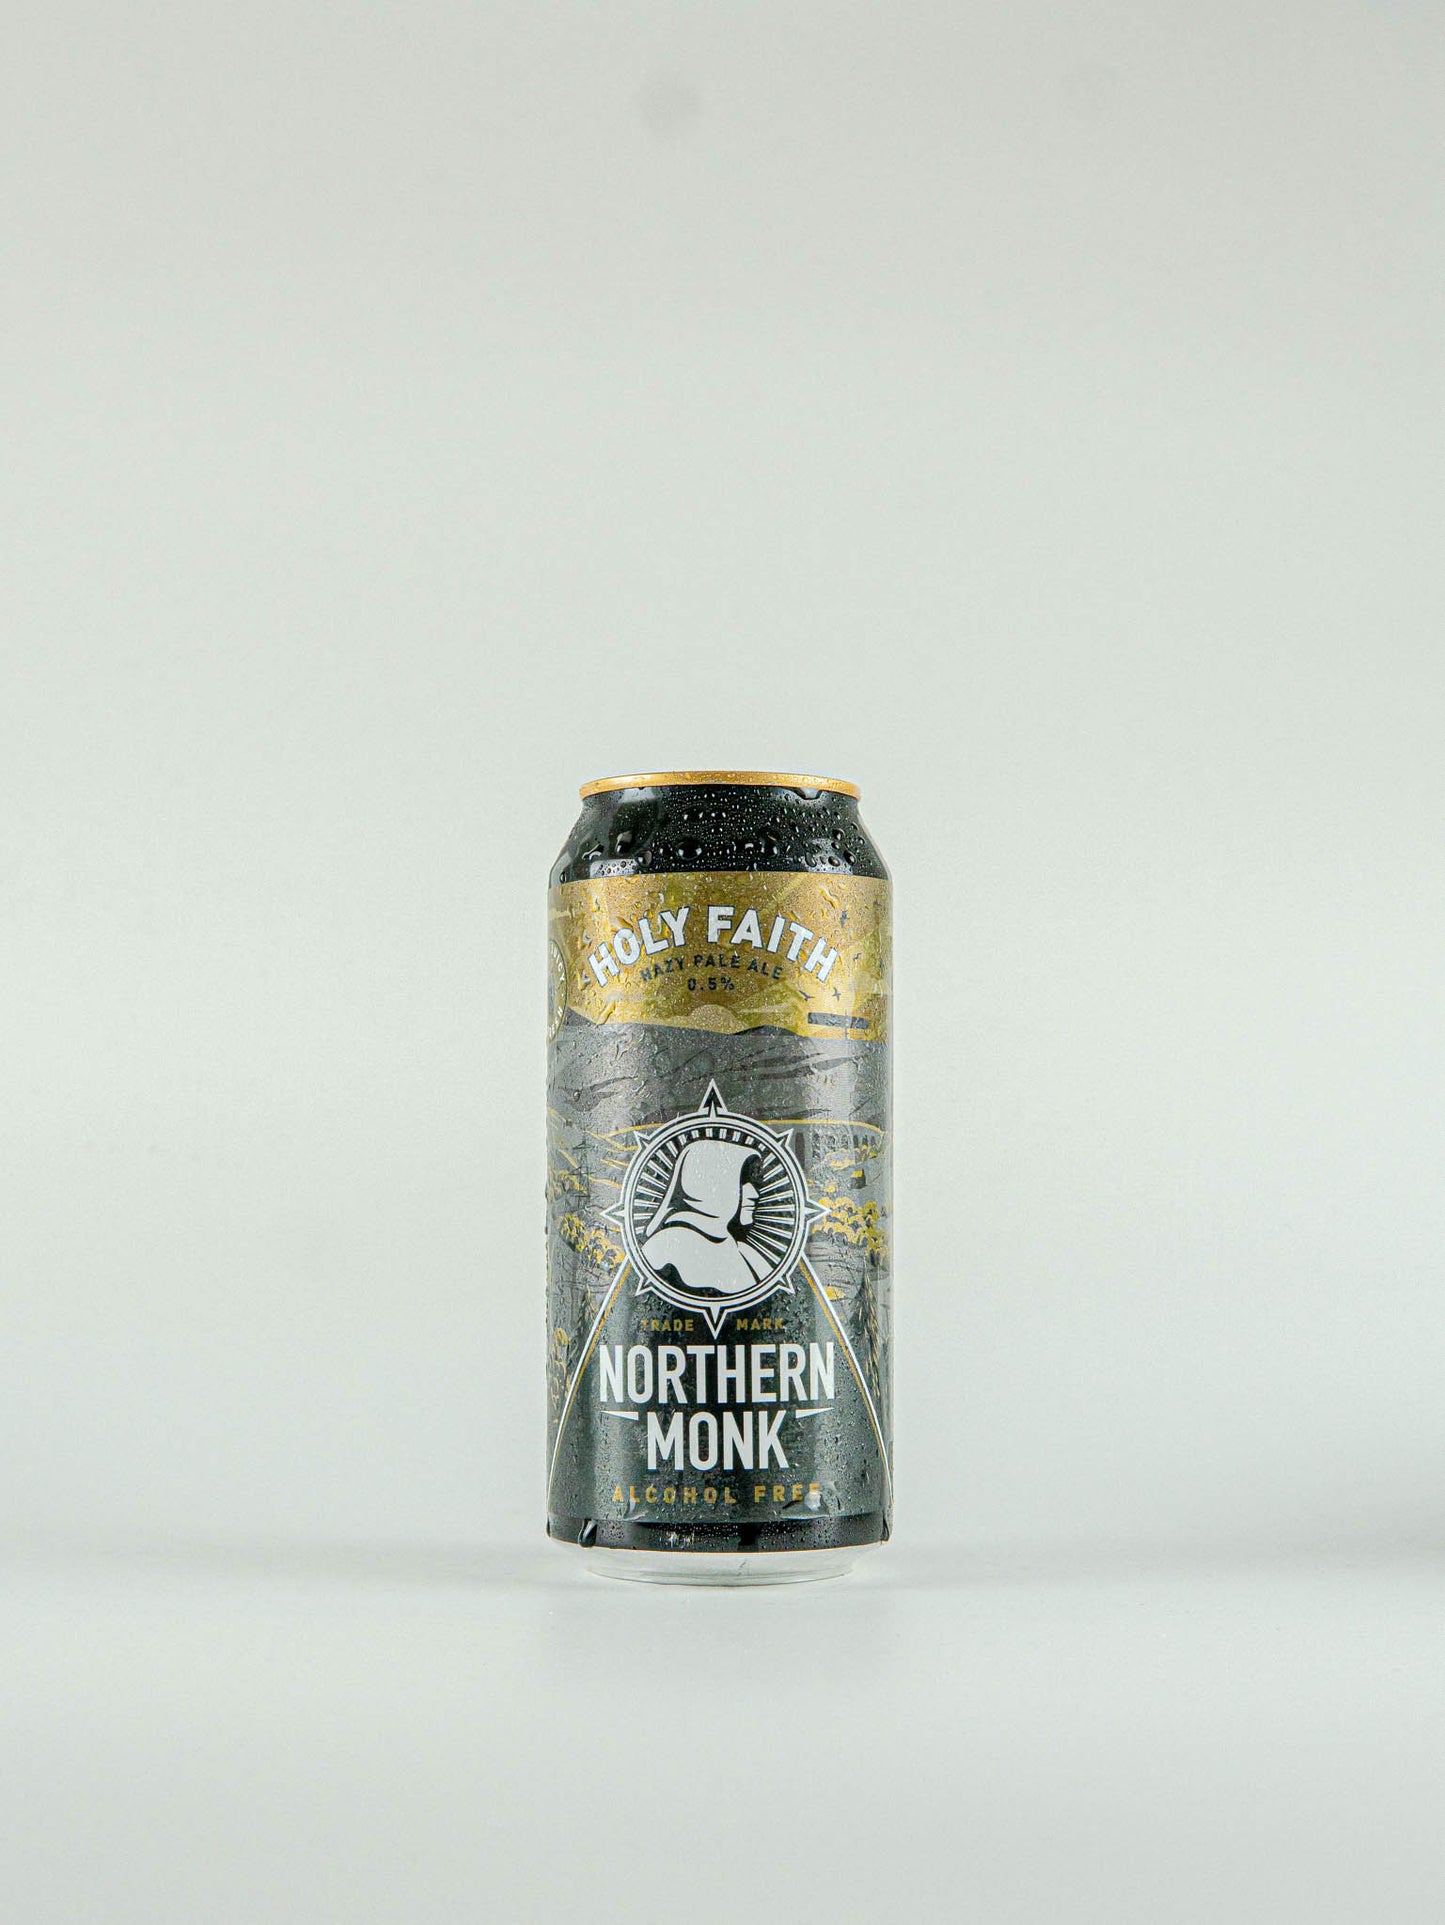 Northern Monk Holy Faith Alcohol Free Hazy Pale Ale 0.5% - 440ml